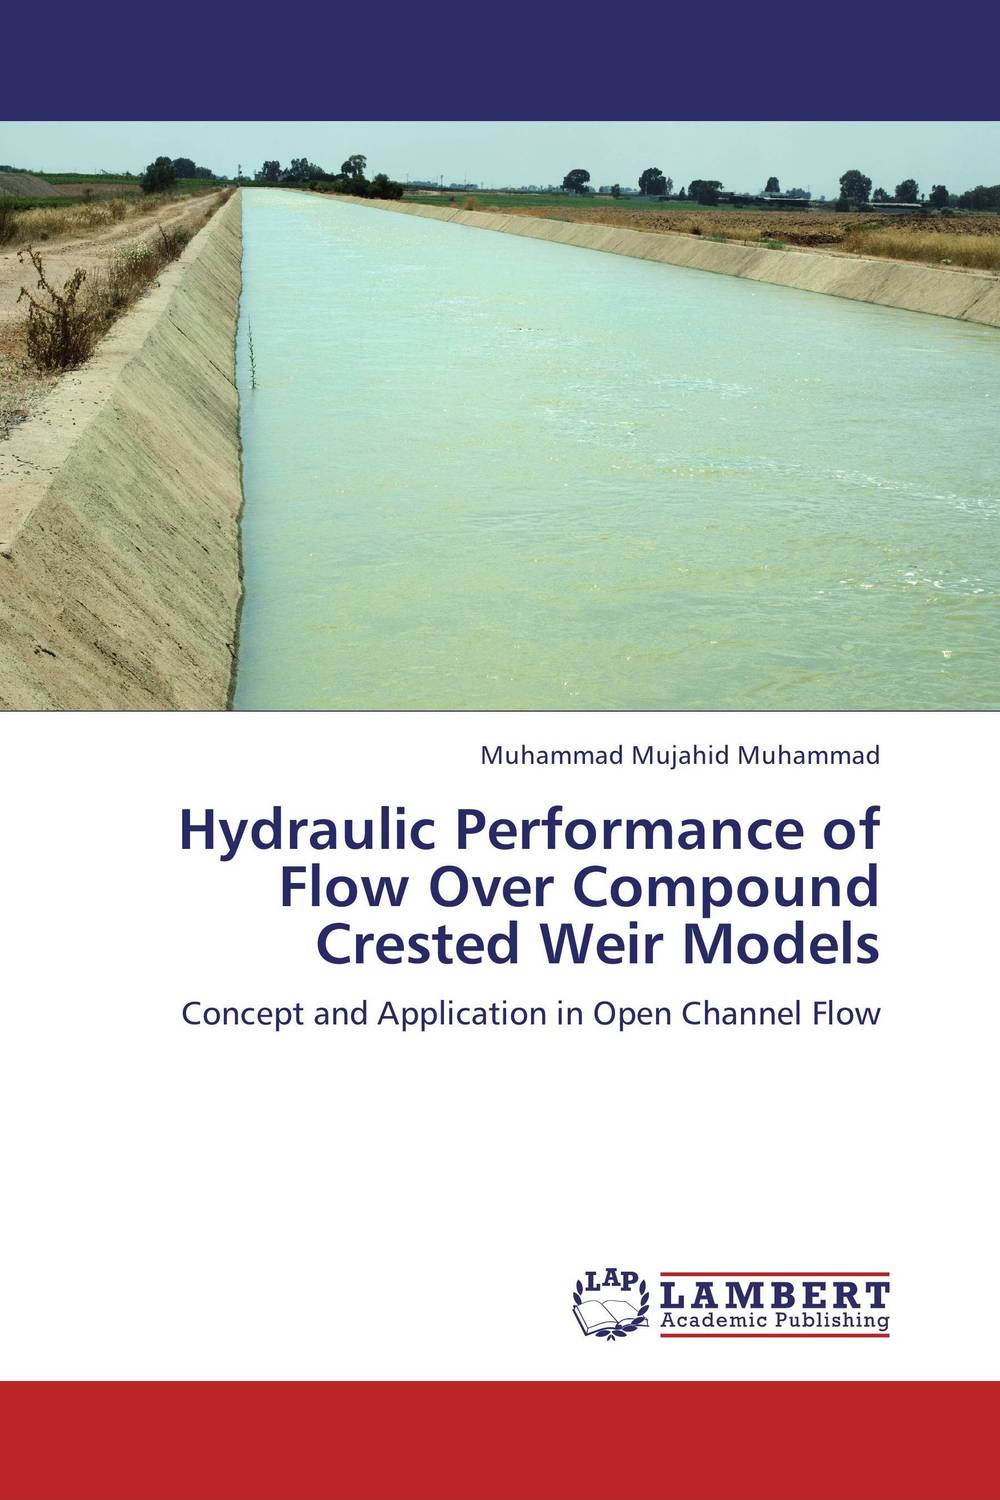 Hydraulic Performance of Flow Over Compound Crested Weir Models